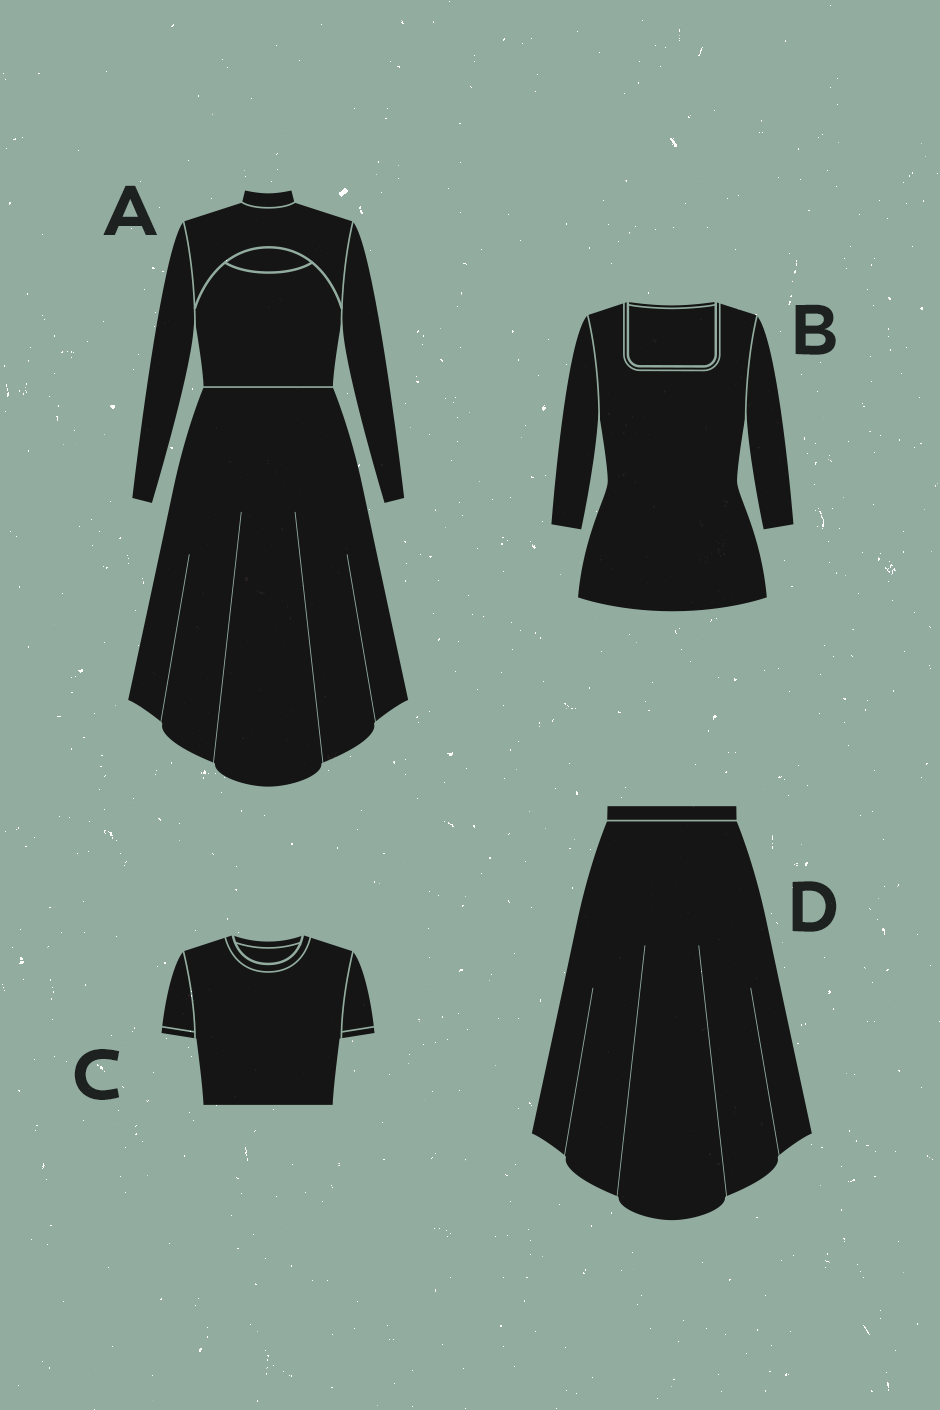 A teal background for this technical drawing sheet.  View A is a dress with a full skirt that is longer at the front than the sides, and a bodice that exposes a window of flesh at high chest.  The sleeves are long and close fitting.  VIew B is a square neck top with 3/4 sleeves.  View C is a round neck tee with short sleeves.  View D is a maxi skirt with a full hem.